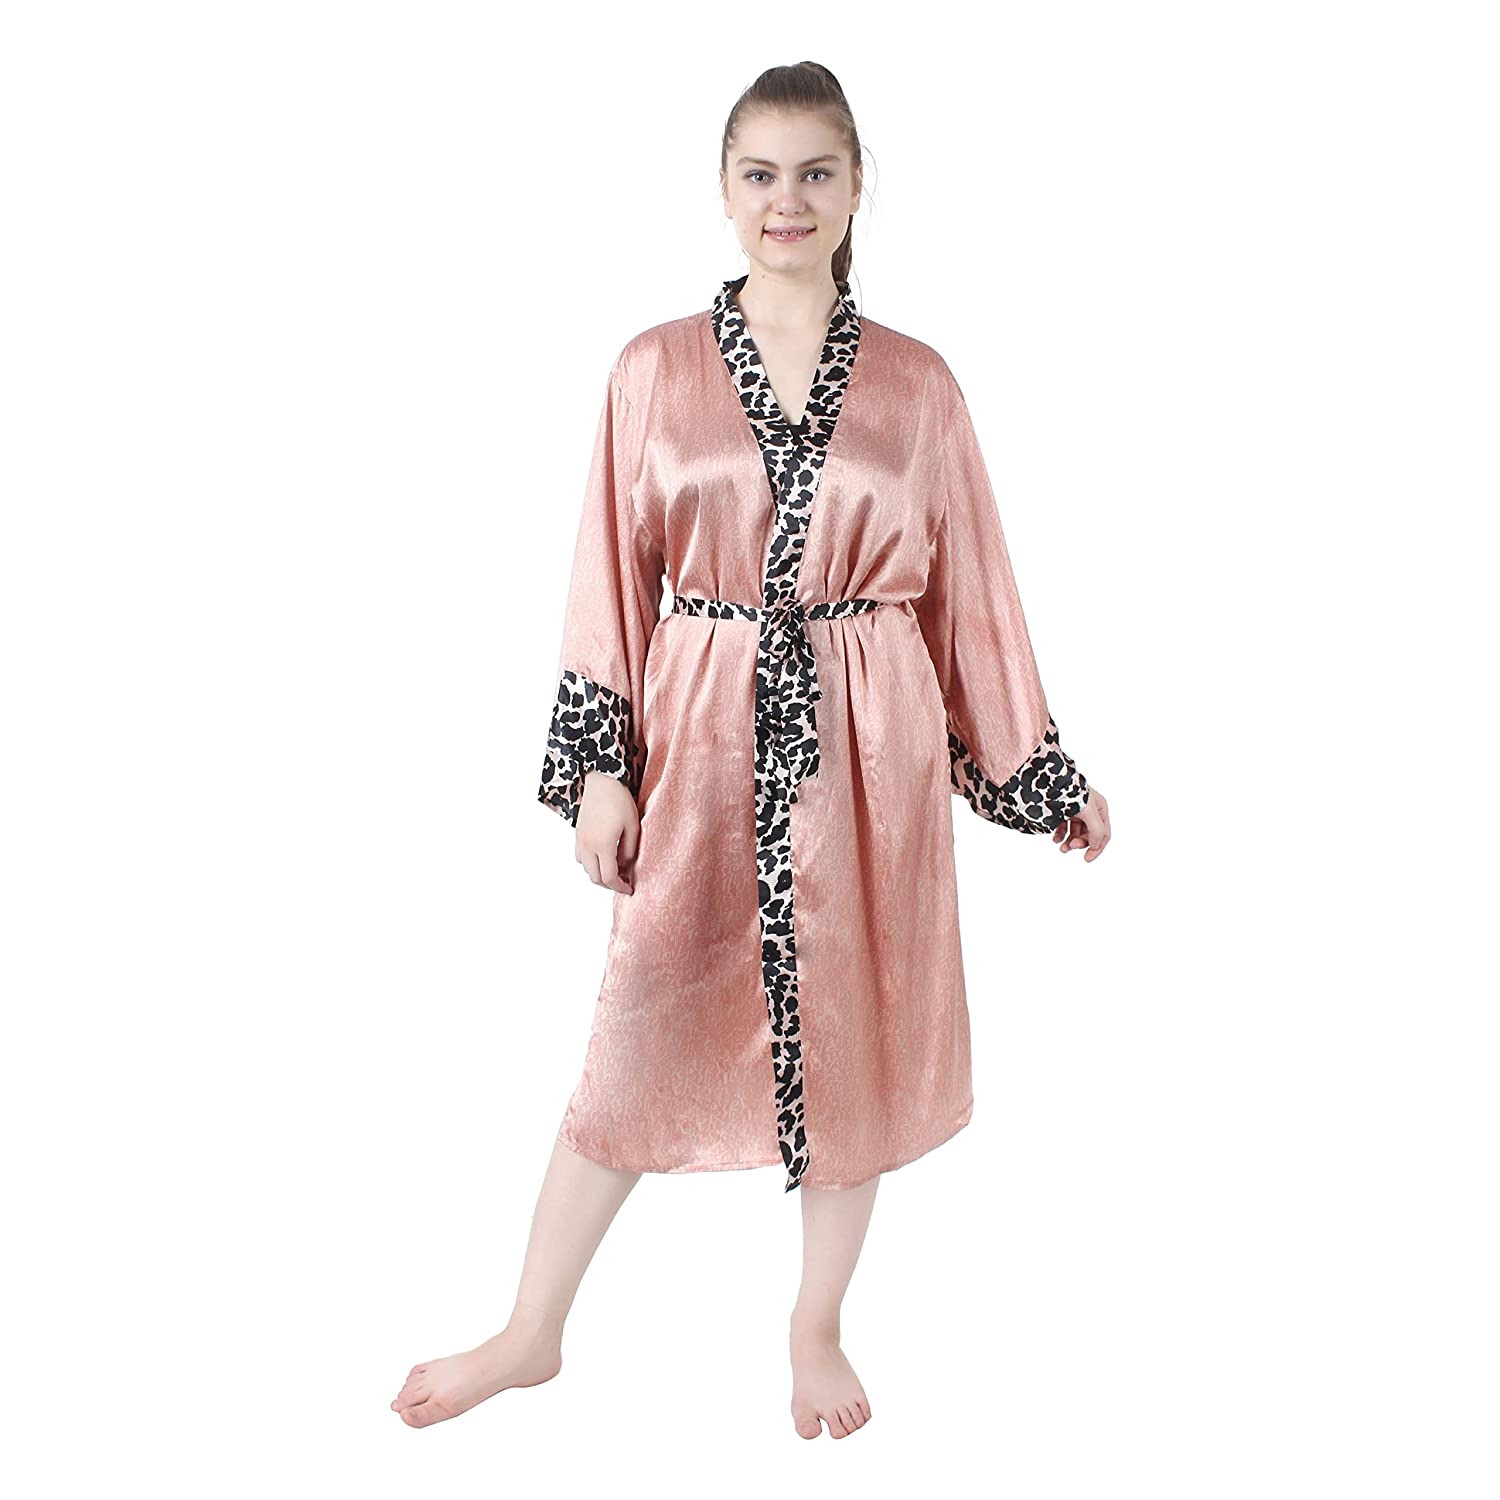 Helpful tips when buying the best bridal robes